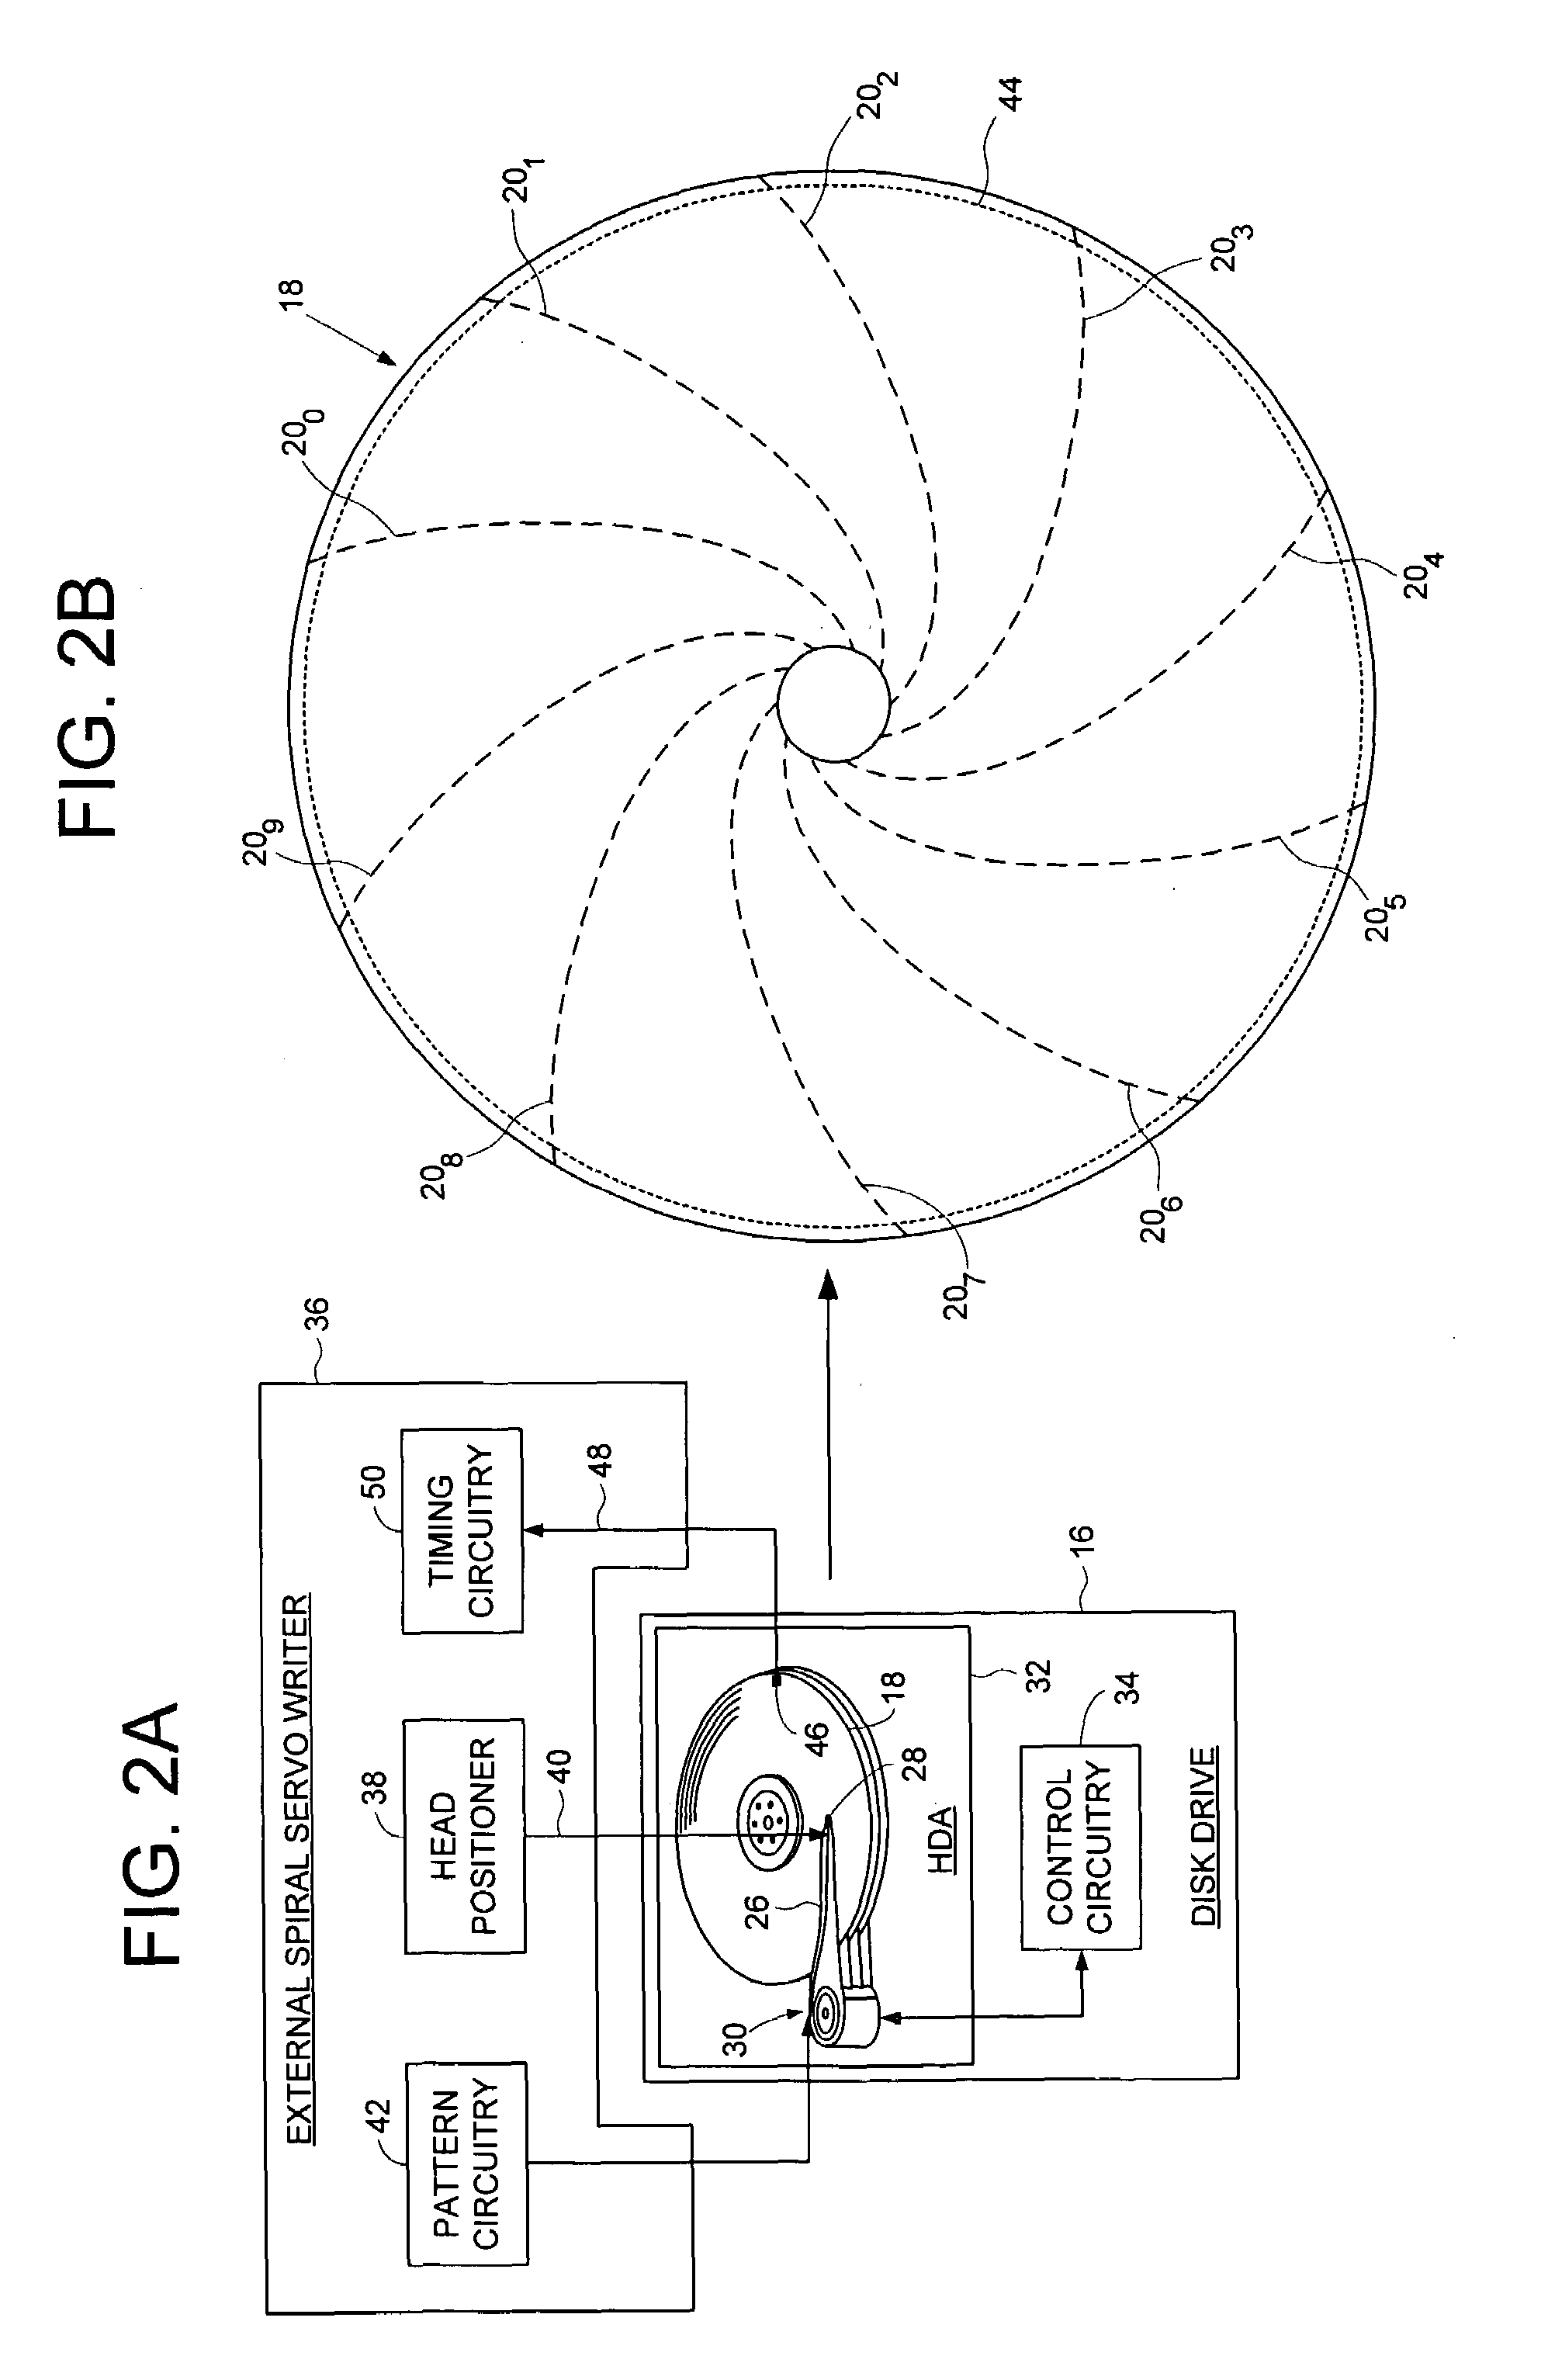 Servo writing a disk drive by synchronizing a servo write clock to a high frequency signal in a spiral track